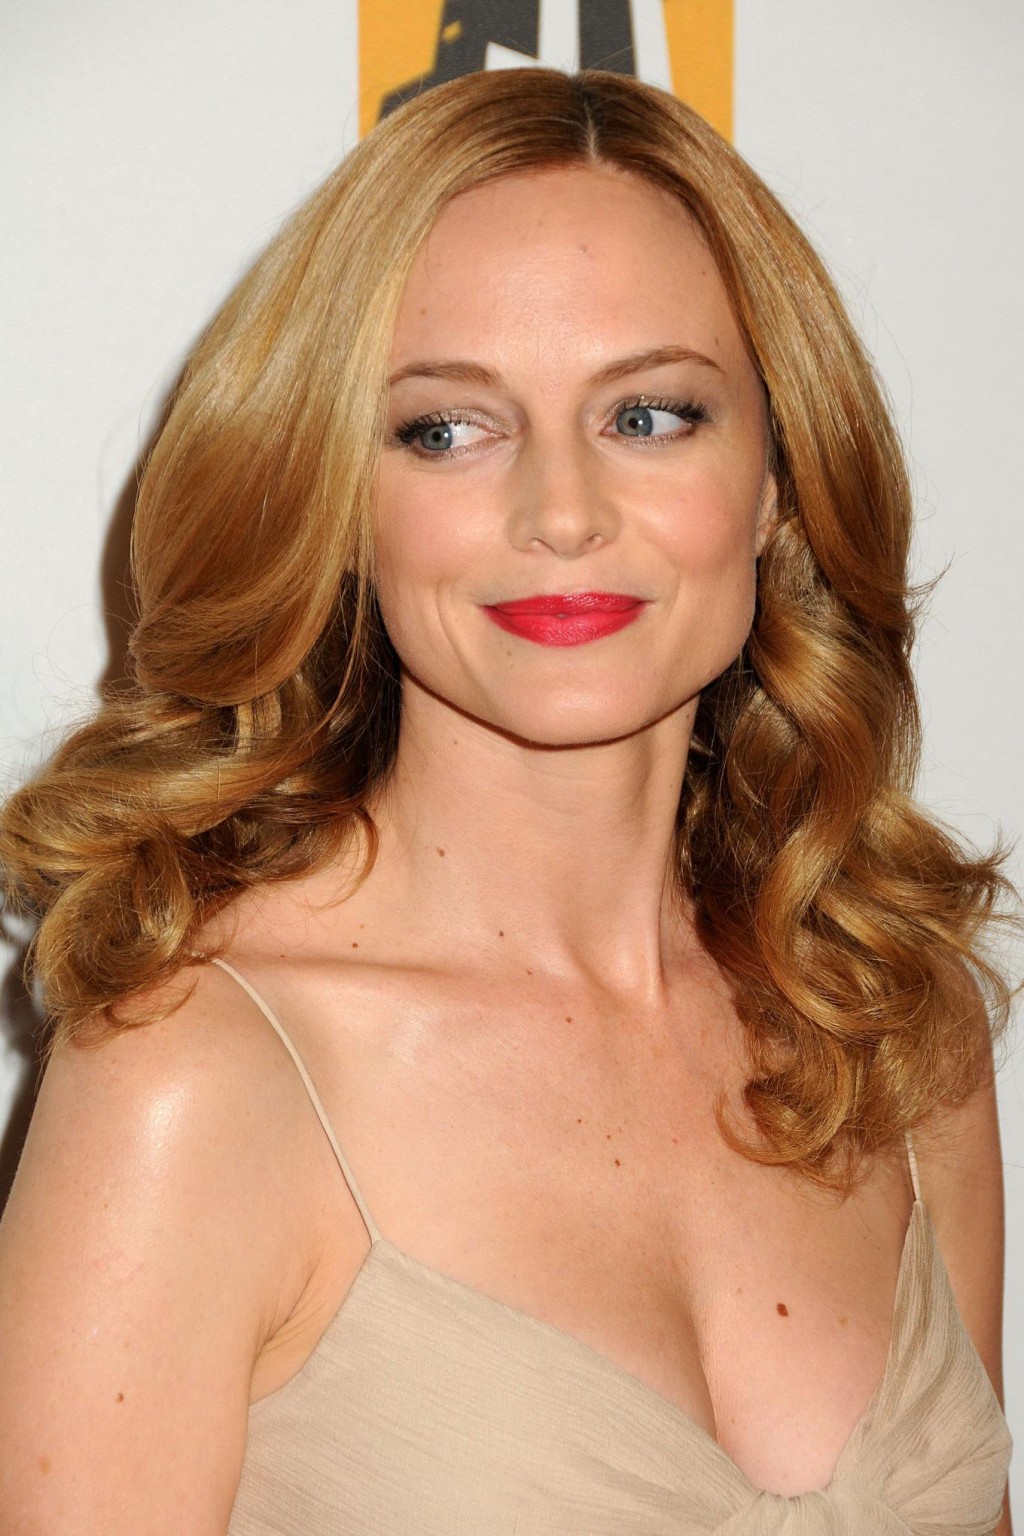 Heather Graham braless showing nice cleavage at 'Hollywood Awards' 14th Annual G #75328644